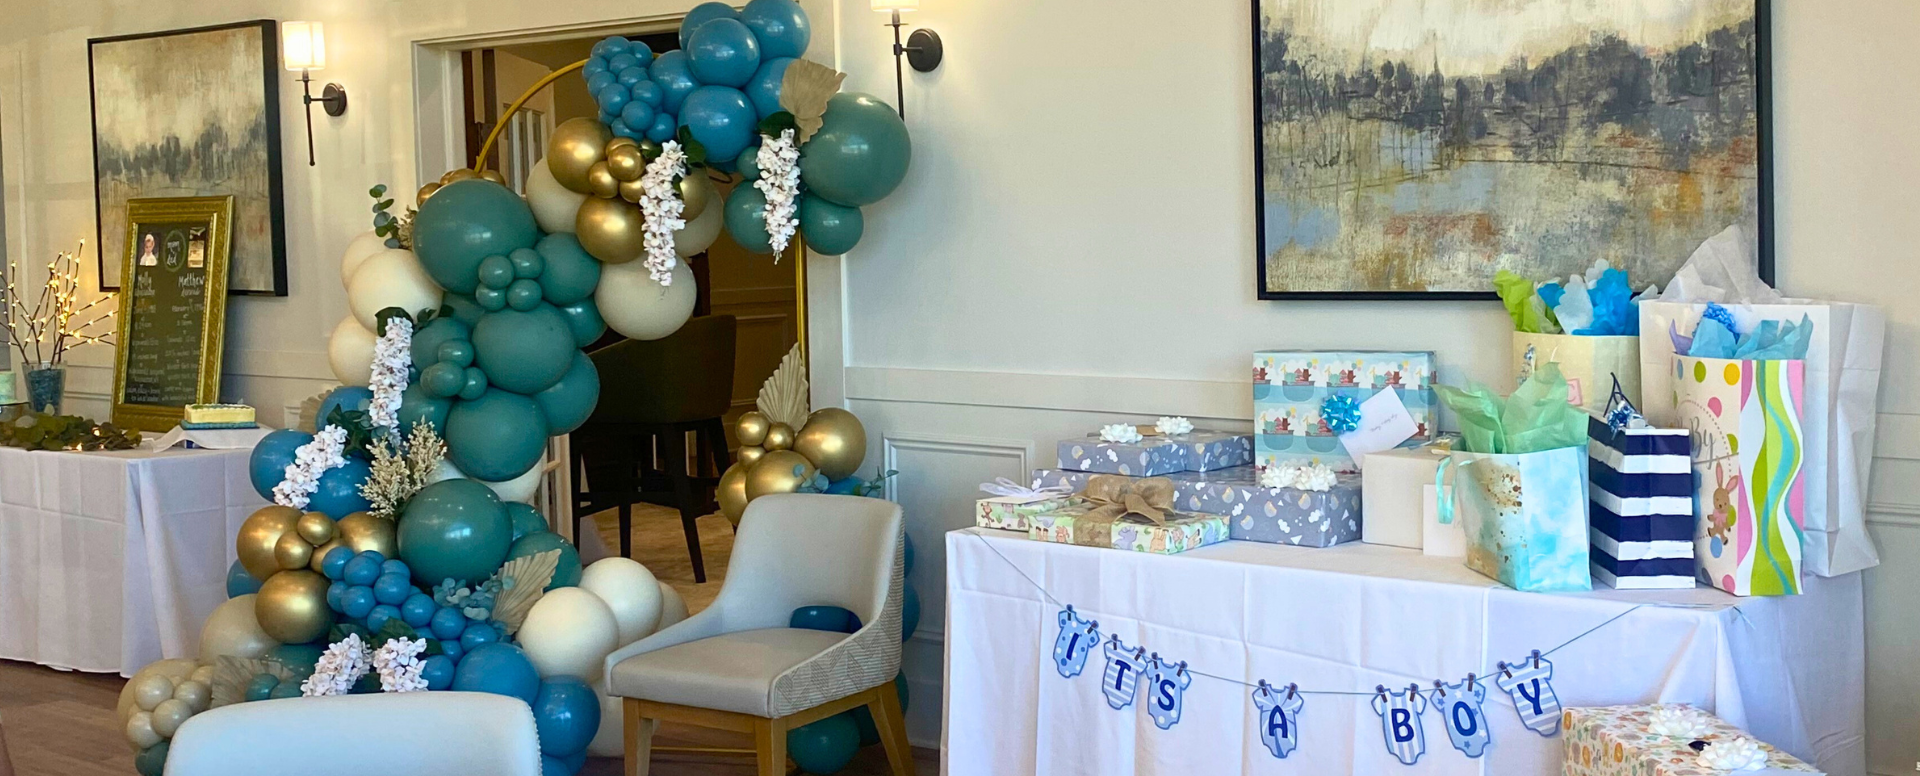 A Heartwarming Baby Shower Celebration Hosted by a Devoted Mother